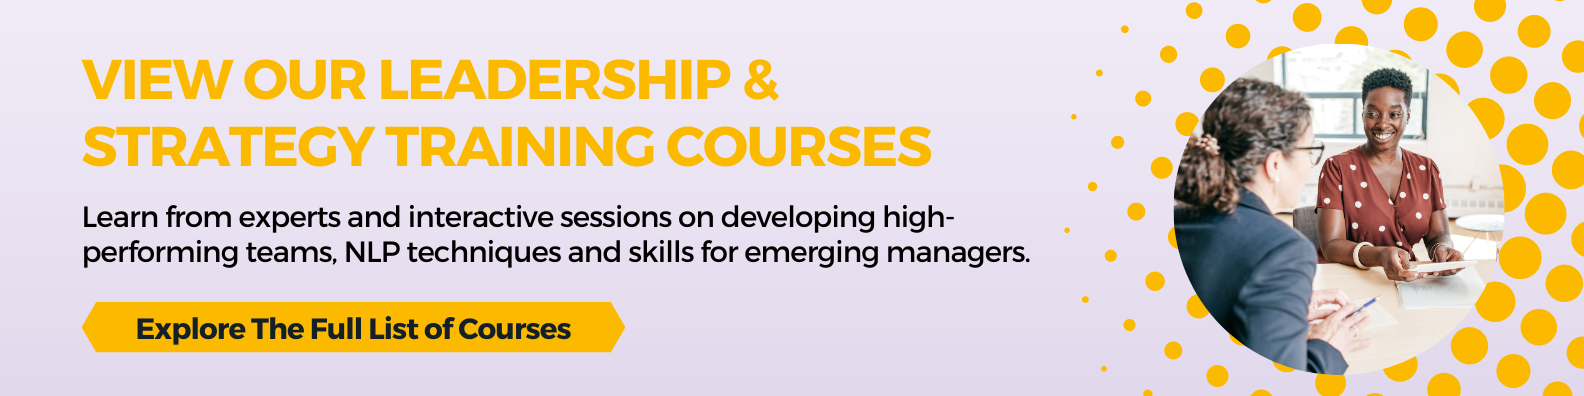 Leadership and strategy courses that will help develop your leadership skills in the workplace